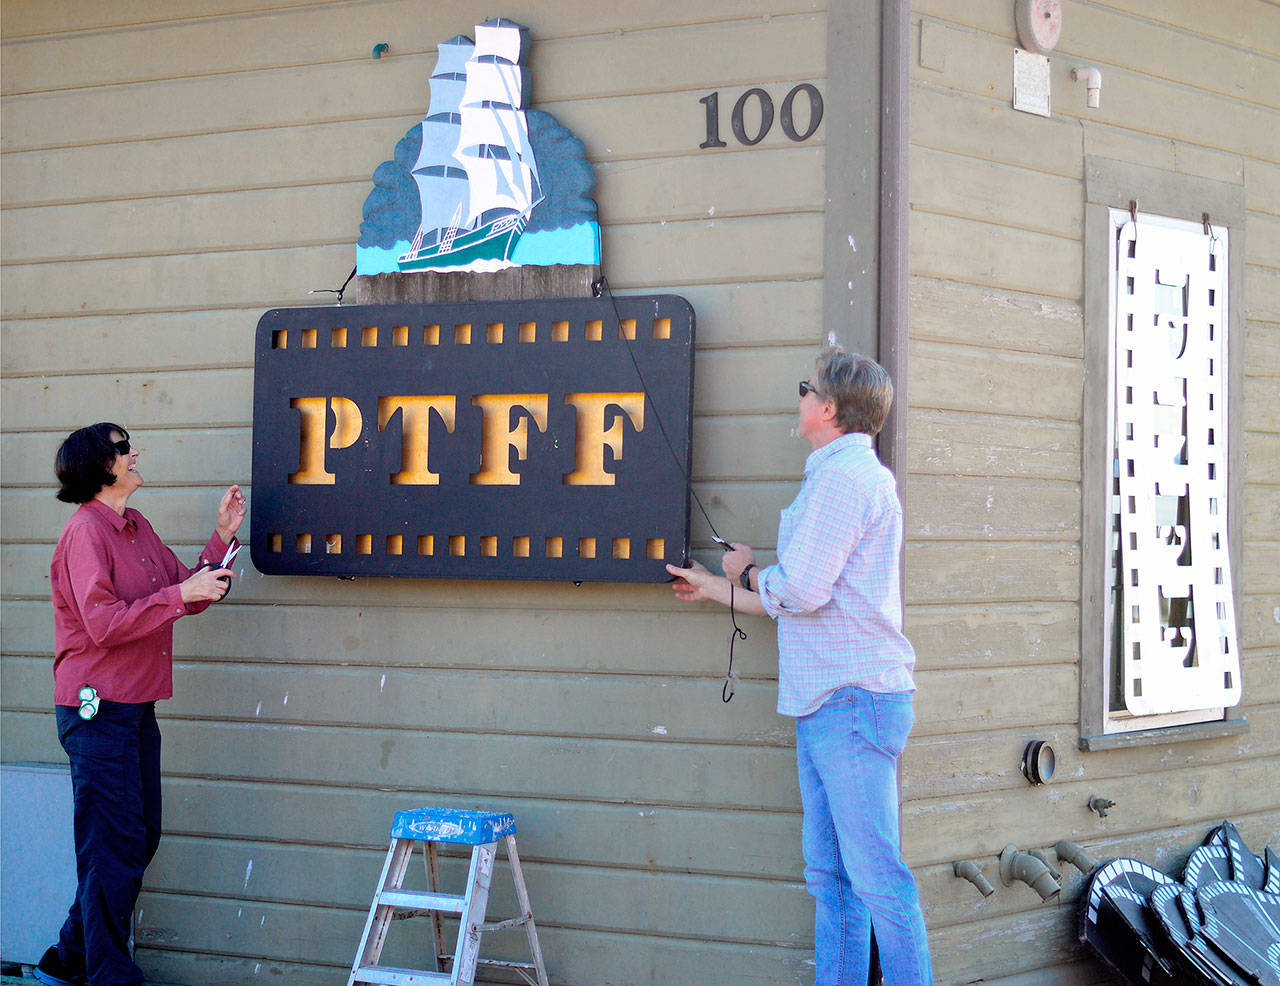 Port Townsend Film Festival volunteers Jayne Marek and Rich Stewart rig up the sign for the Festival Bar on the Dock on Wednesday morning. (Diane Urbani de la Paz/for Peninsula Daily News)